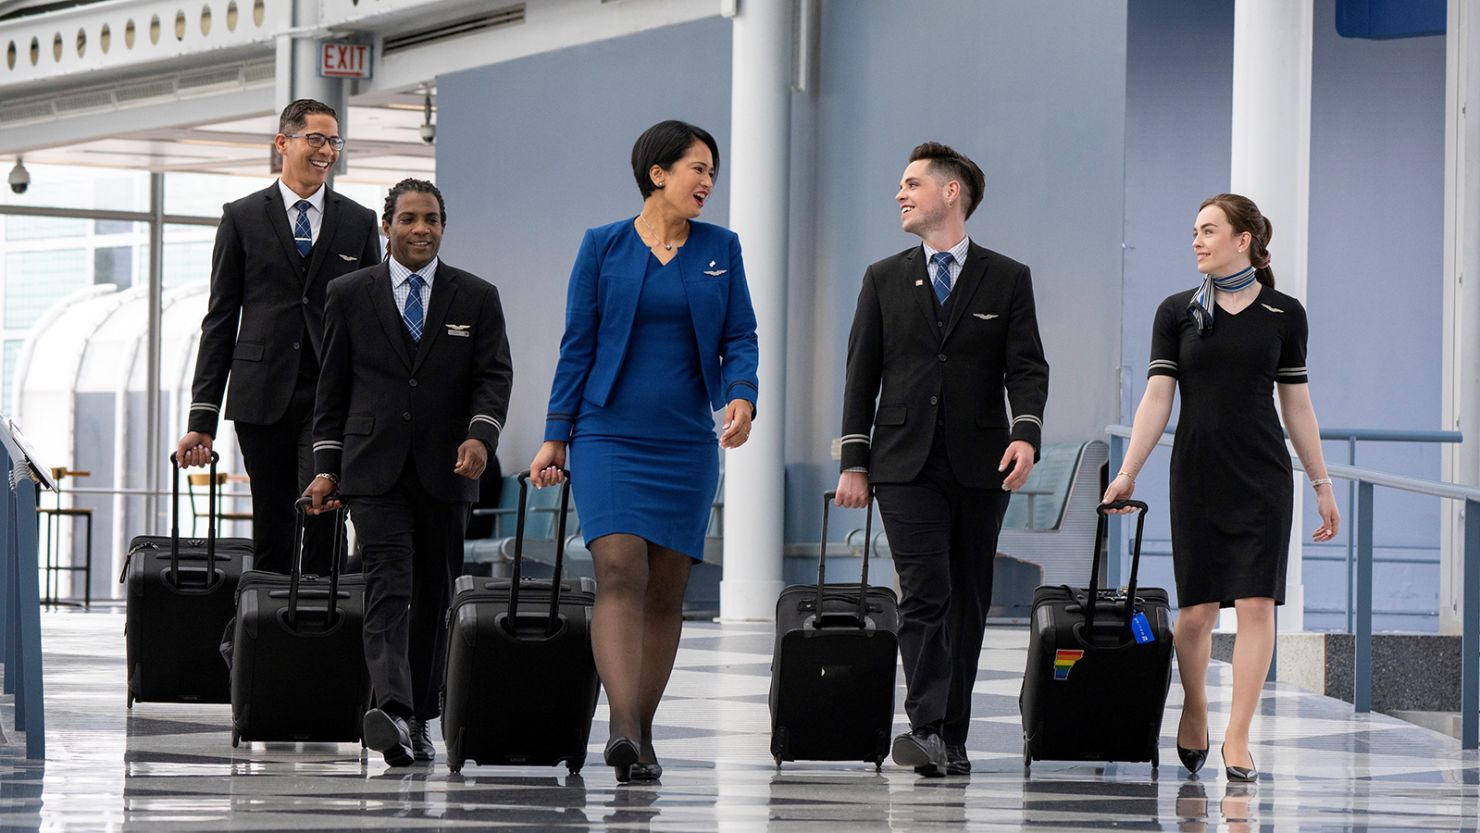 United-Airlines-New-Uniform-Guidelines-August-2021 (1)